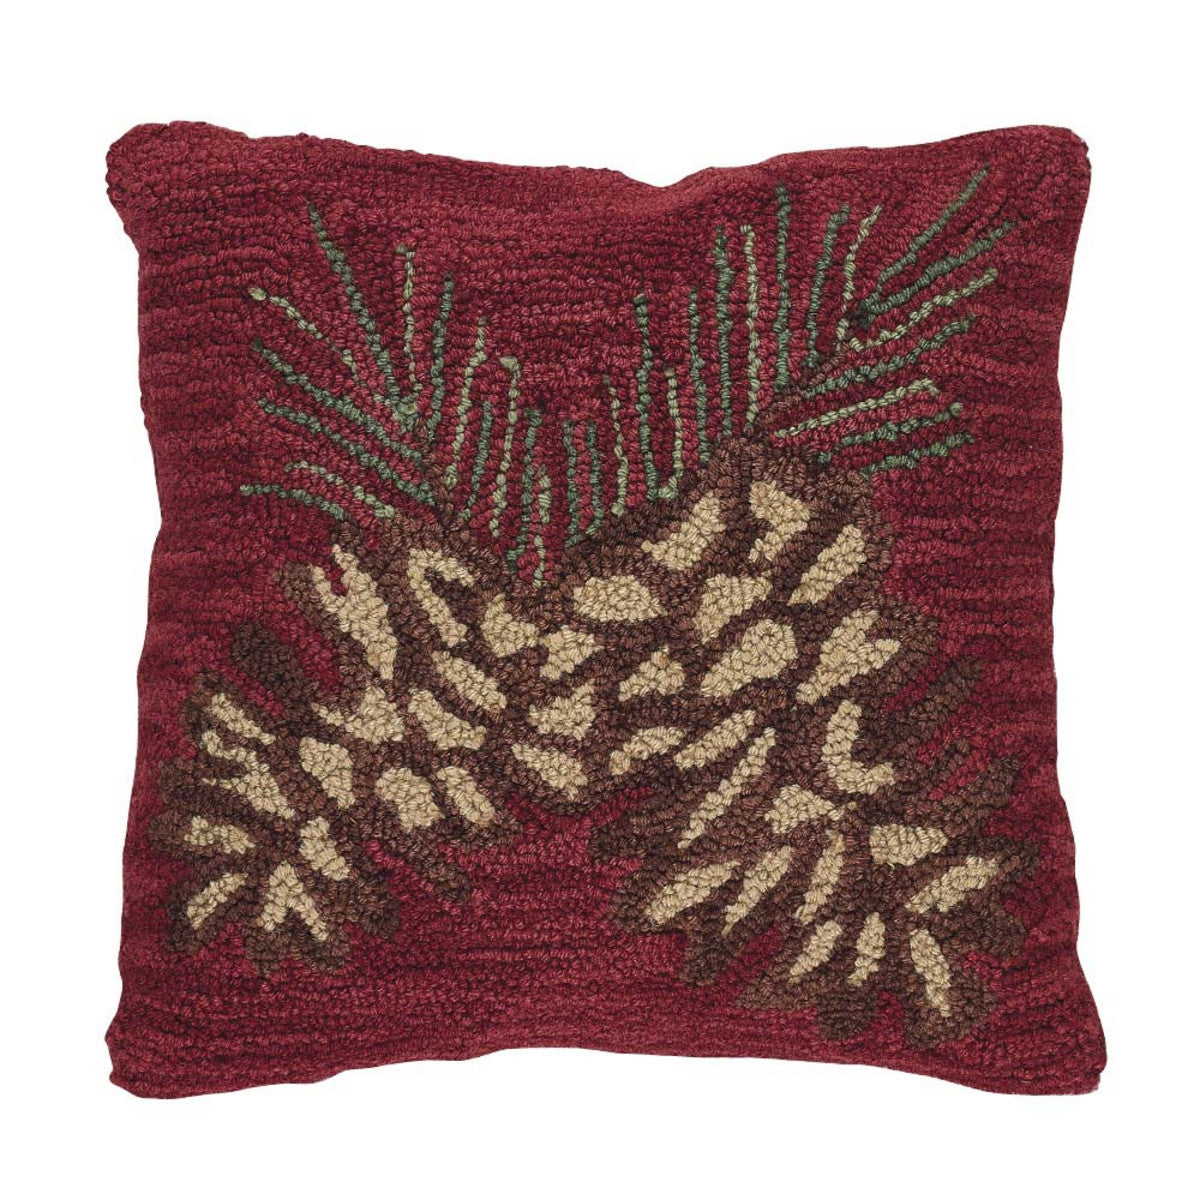 Pinecone Hooked Pillow Down Feather Fill 18"x18" - Park Designs